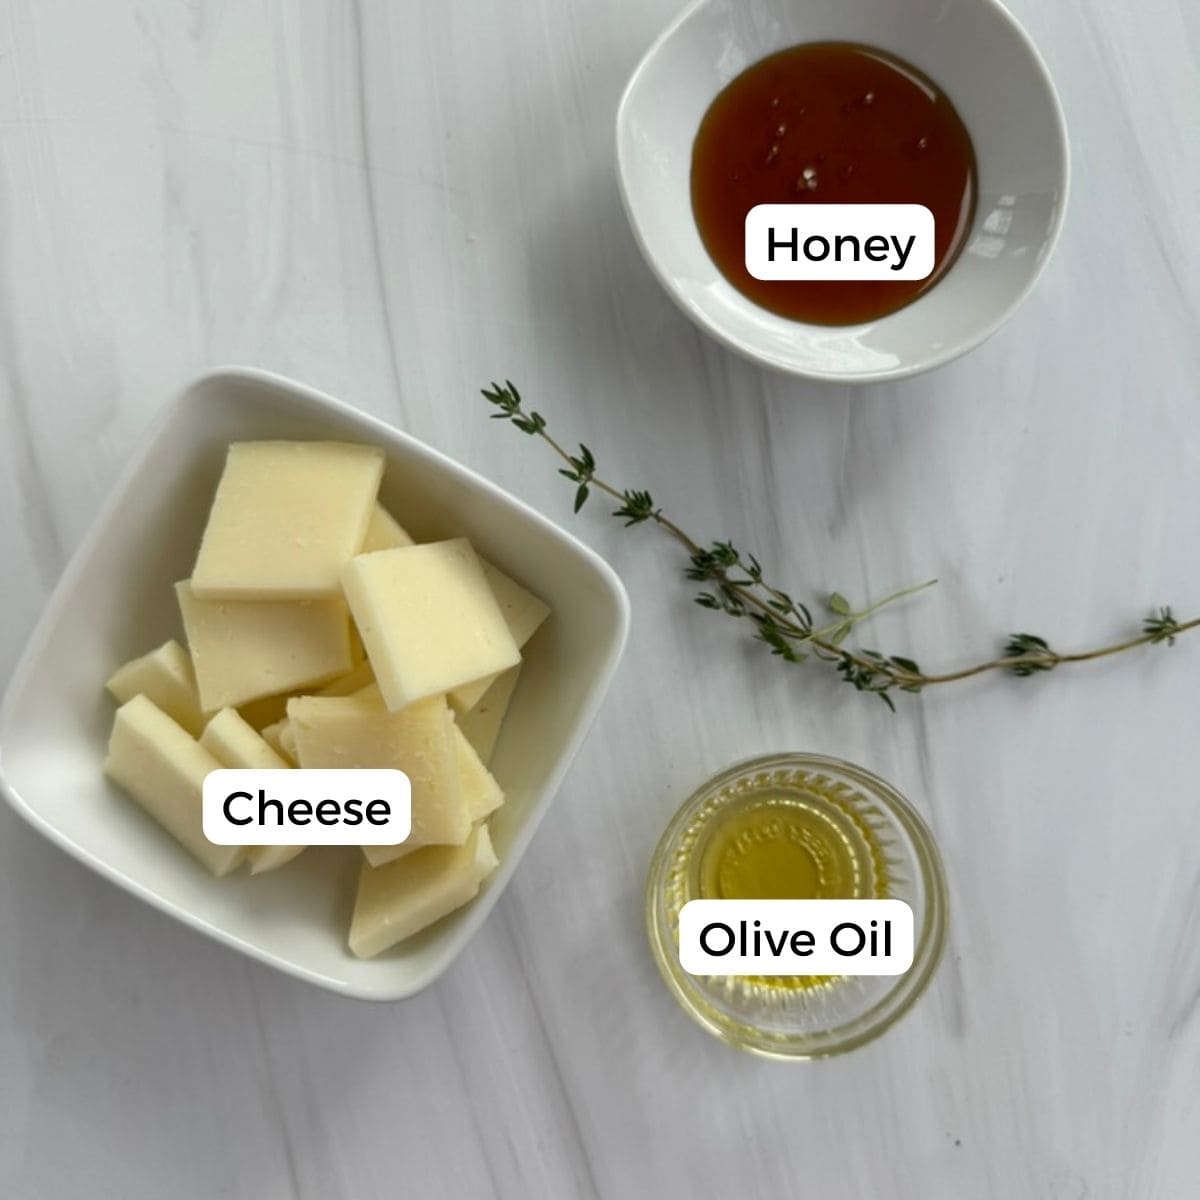 ingredients for Portuguese Creamy Baked Cheese with Honey and Olive Oil are cheese, honey, and olive oil.